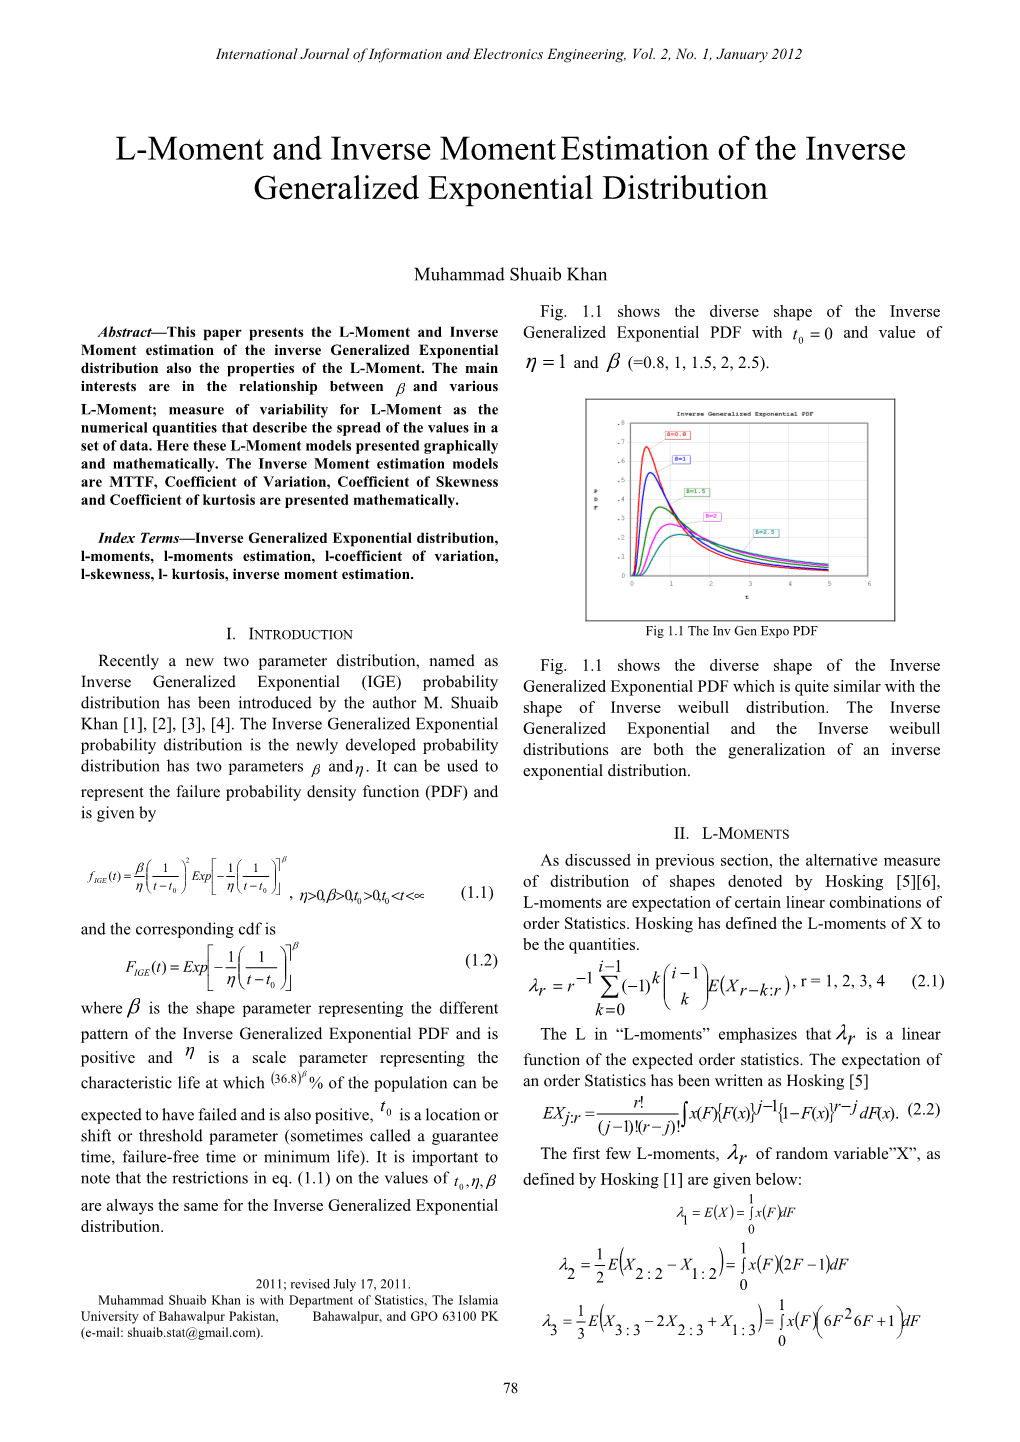 L-Moment and Inverse Momentestimation of the Inverse Generalized Exponential Distribution